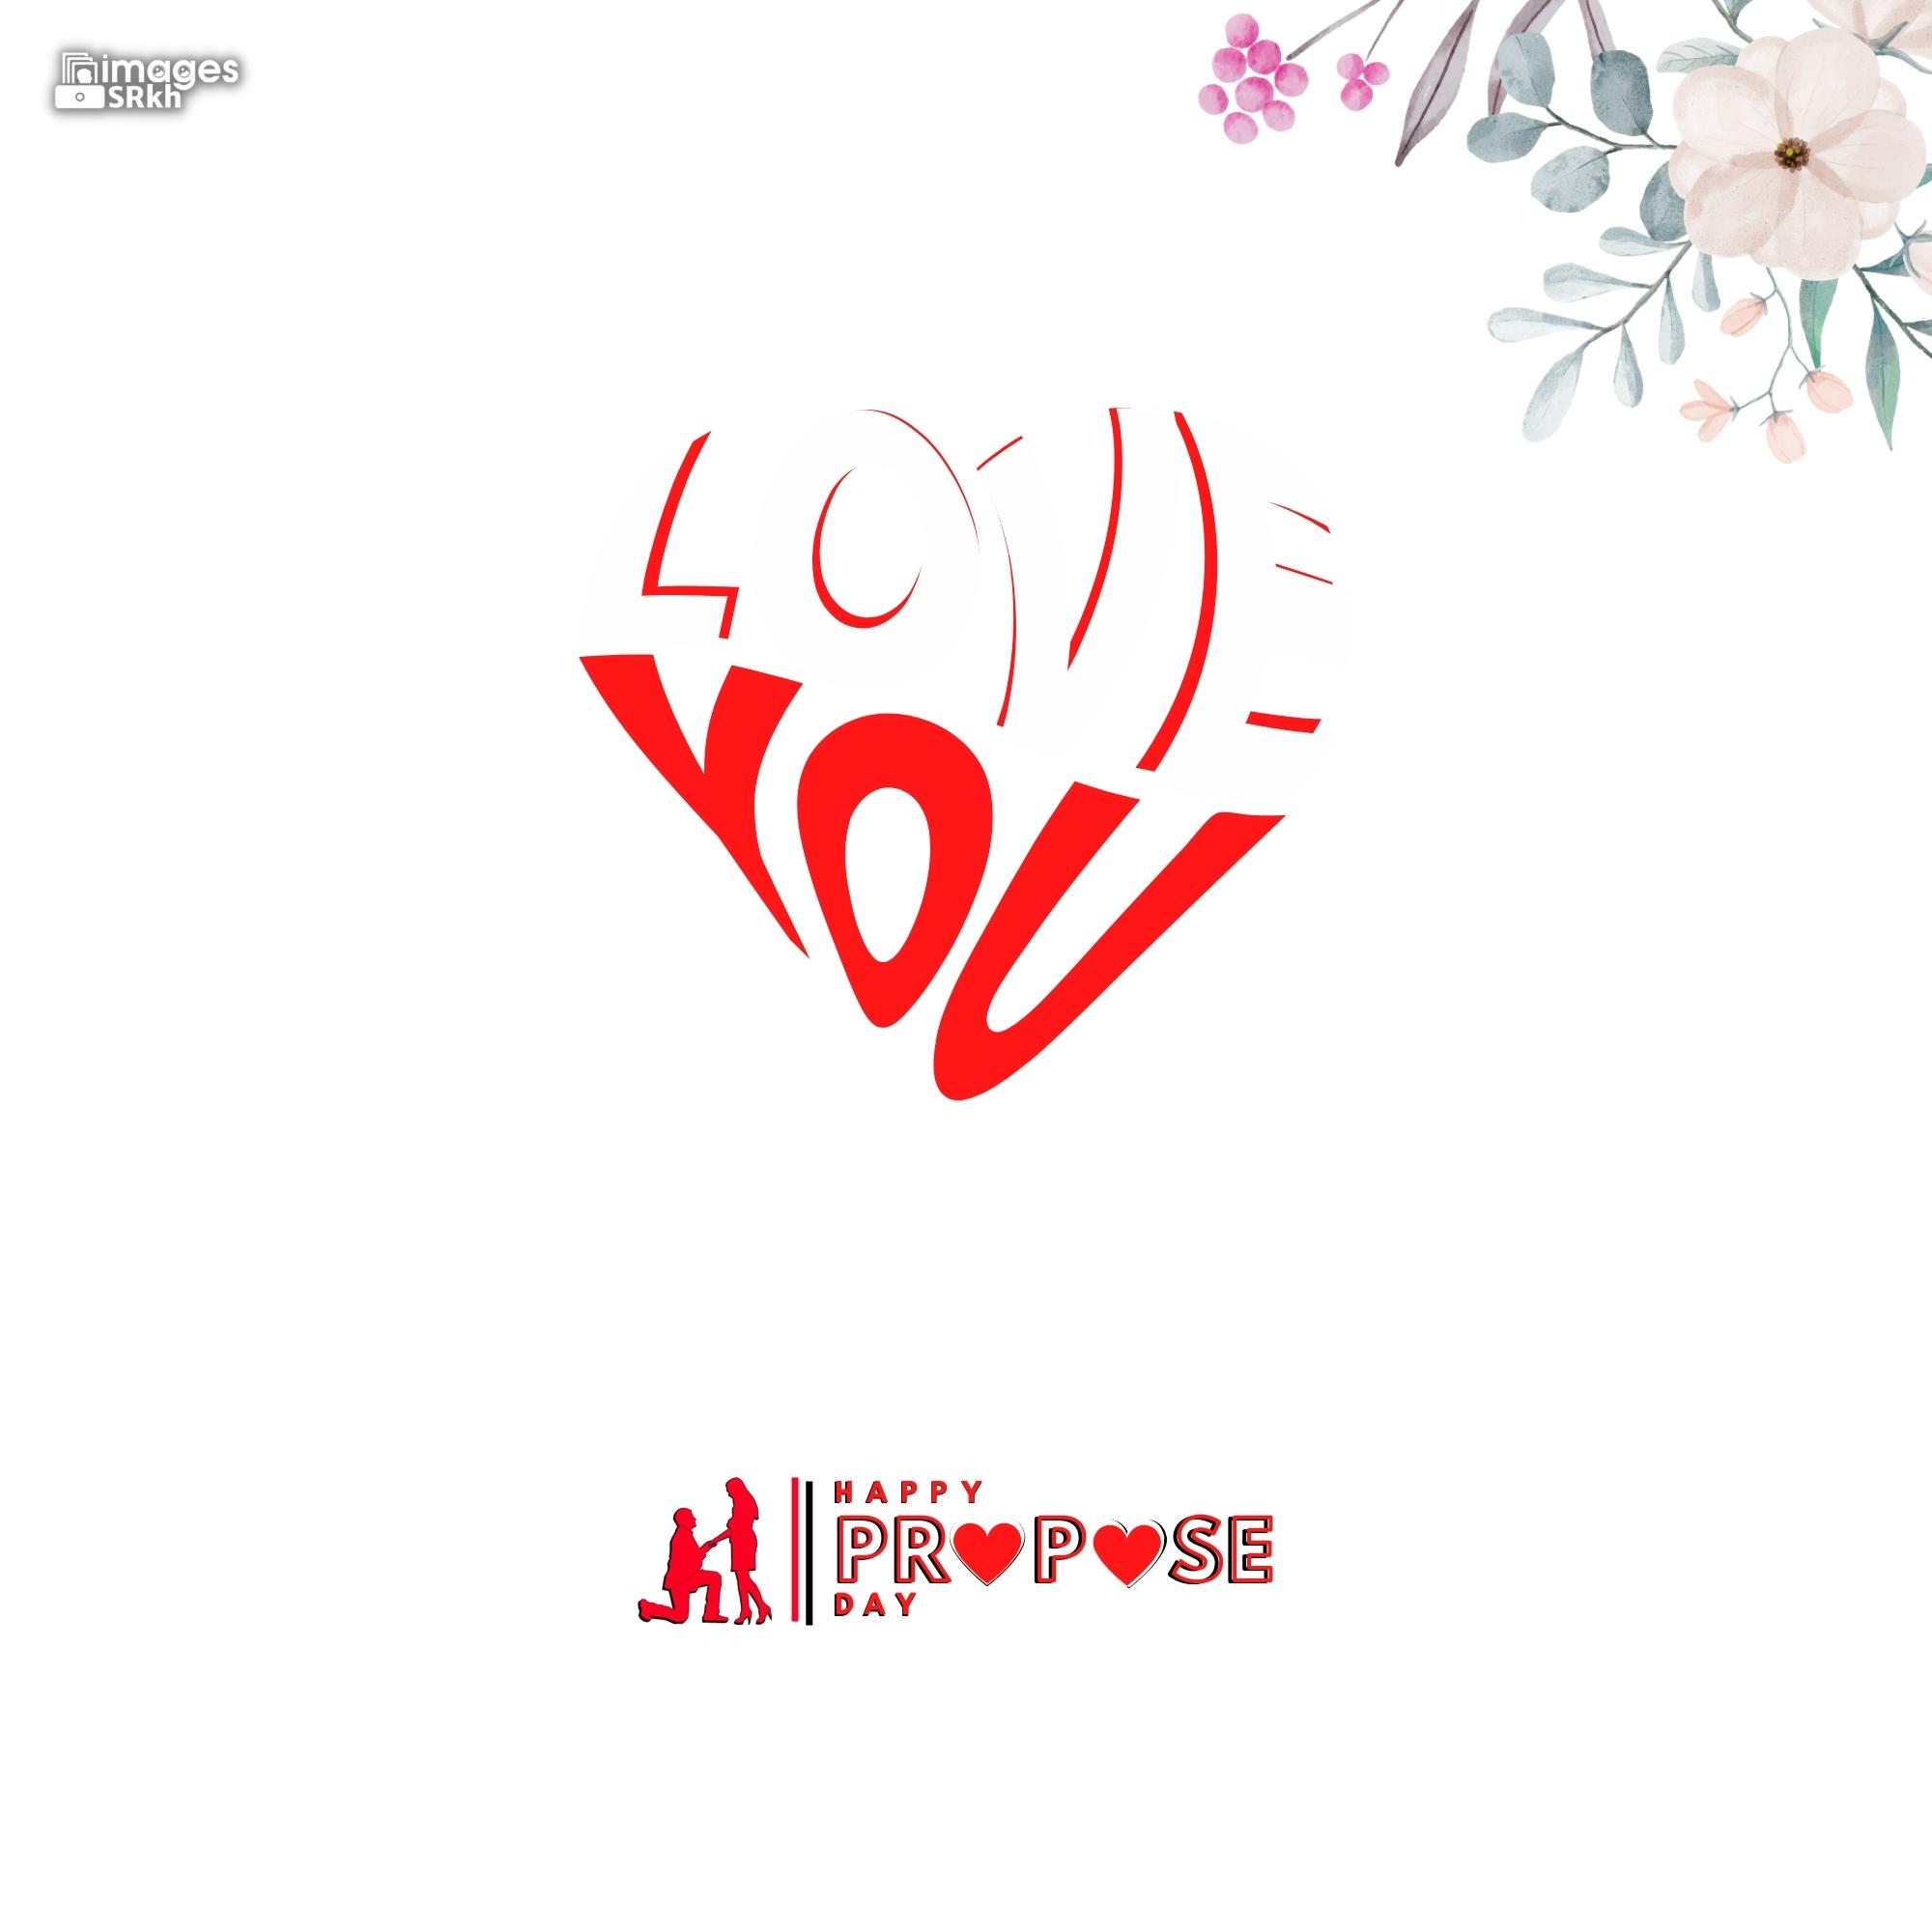 Happy Propose Day Images | 353 | I LOVE YOU